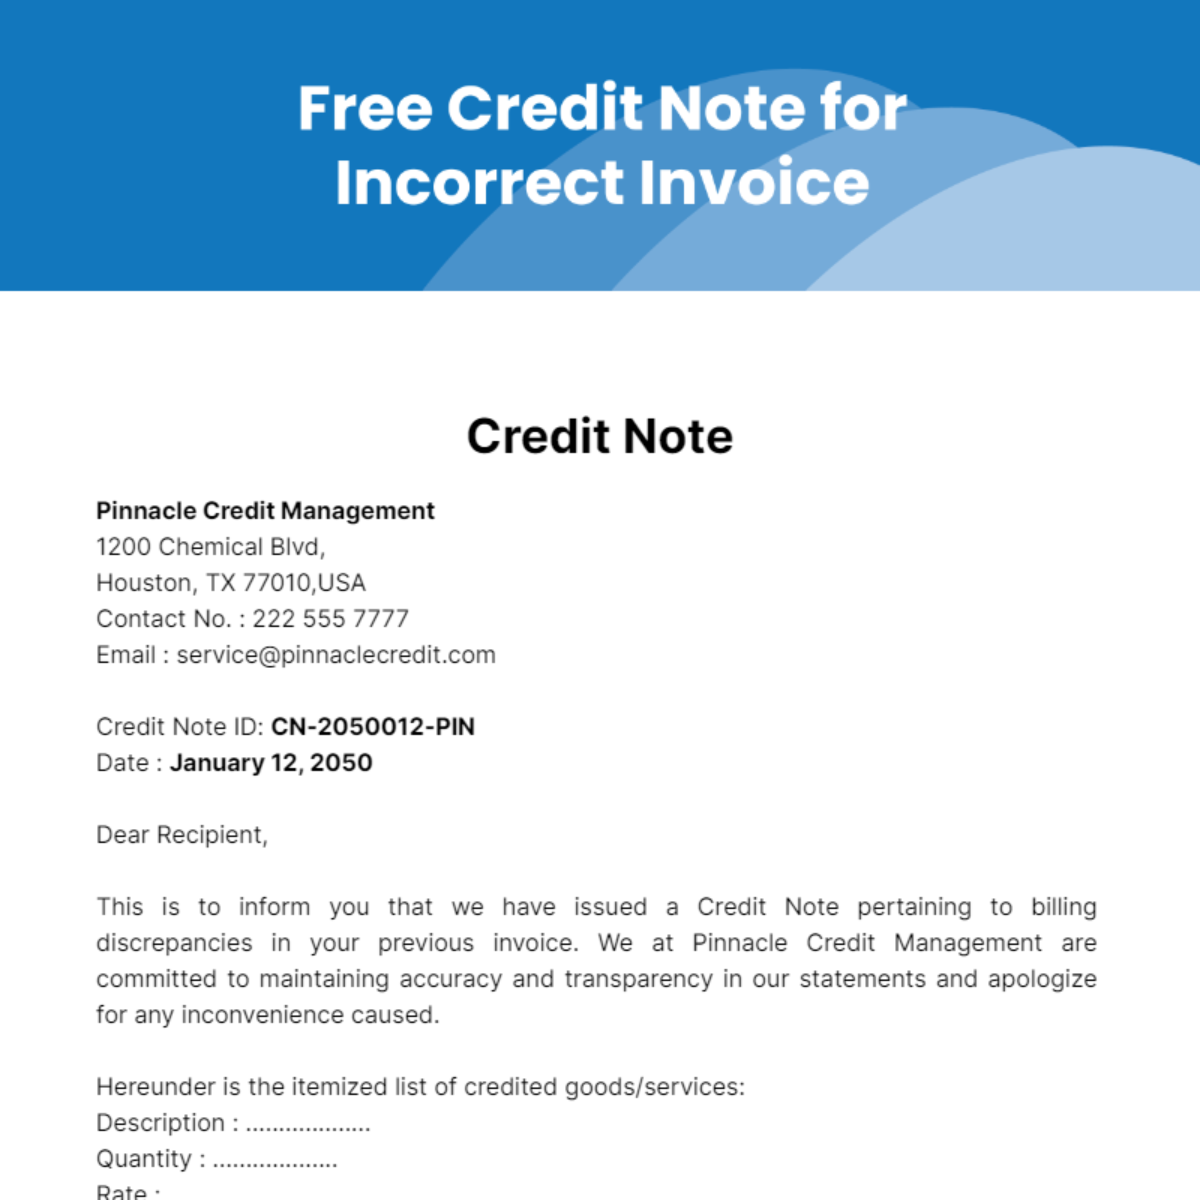 Credit Note for Incorrect Invoice Template